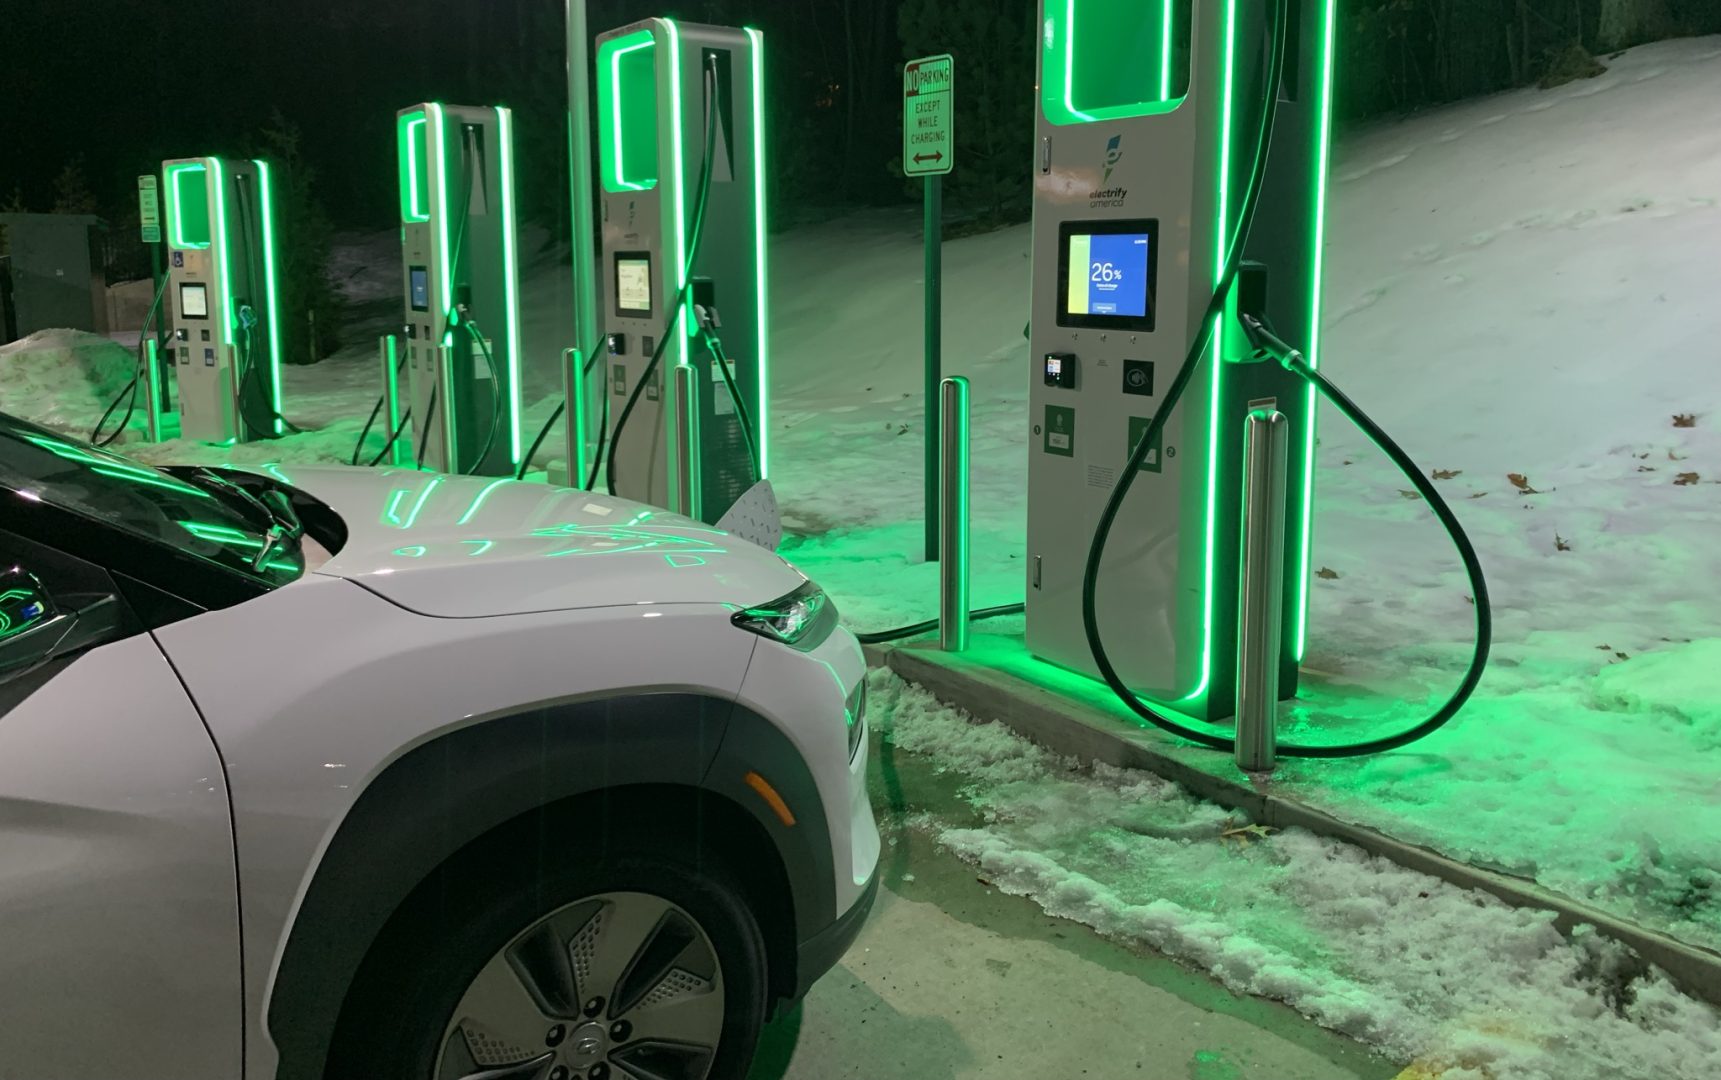 Gas prices got you wanting an electric or hybrid car? Well, good luck finding one | WITF